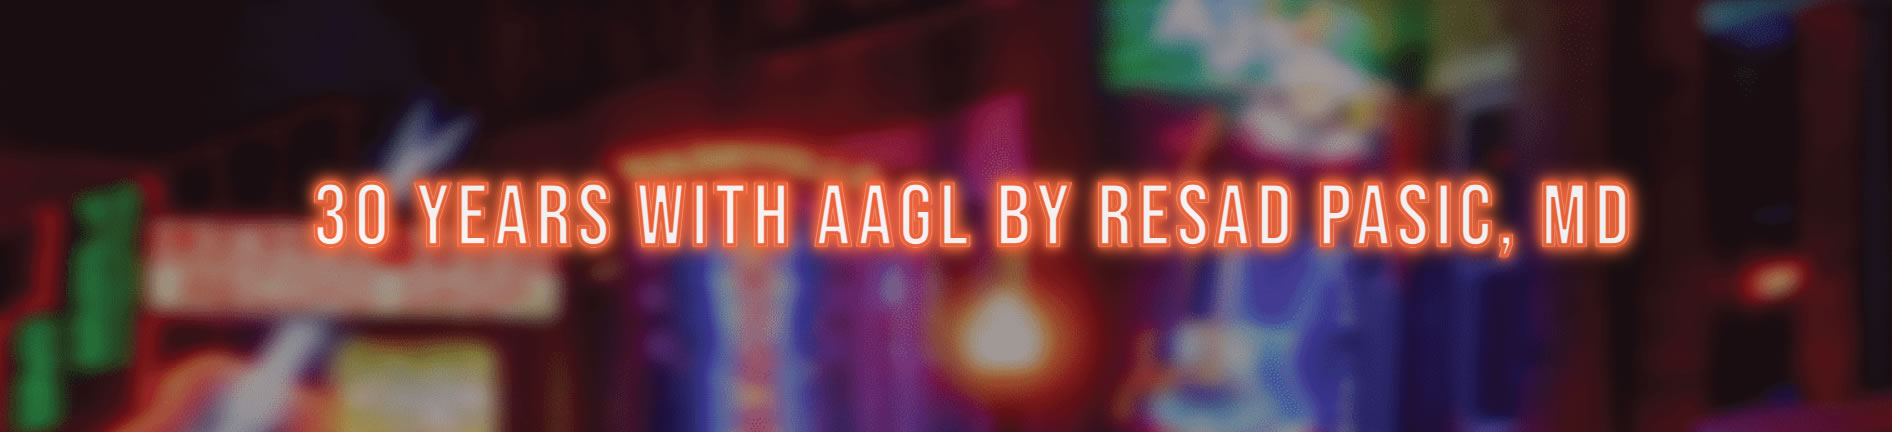 30 years with AAGL by Resad Pasic MD